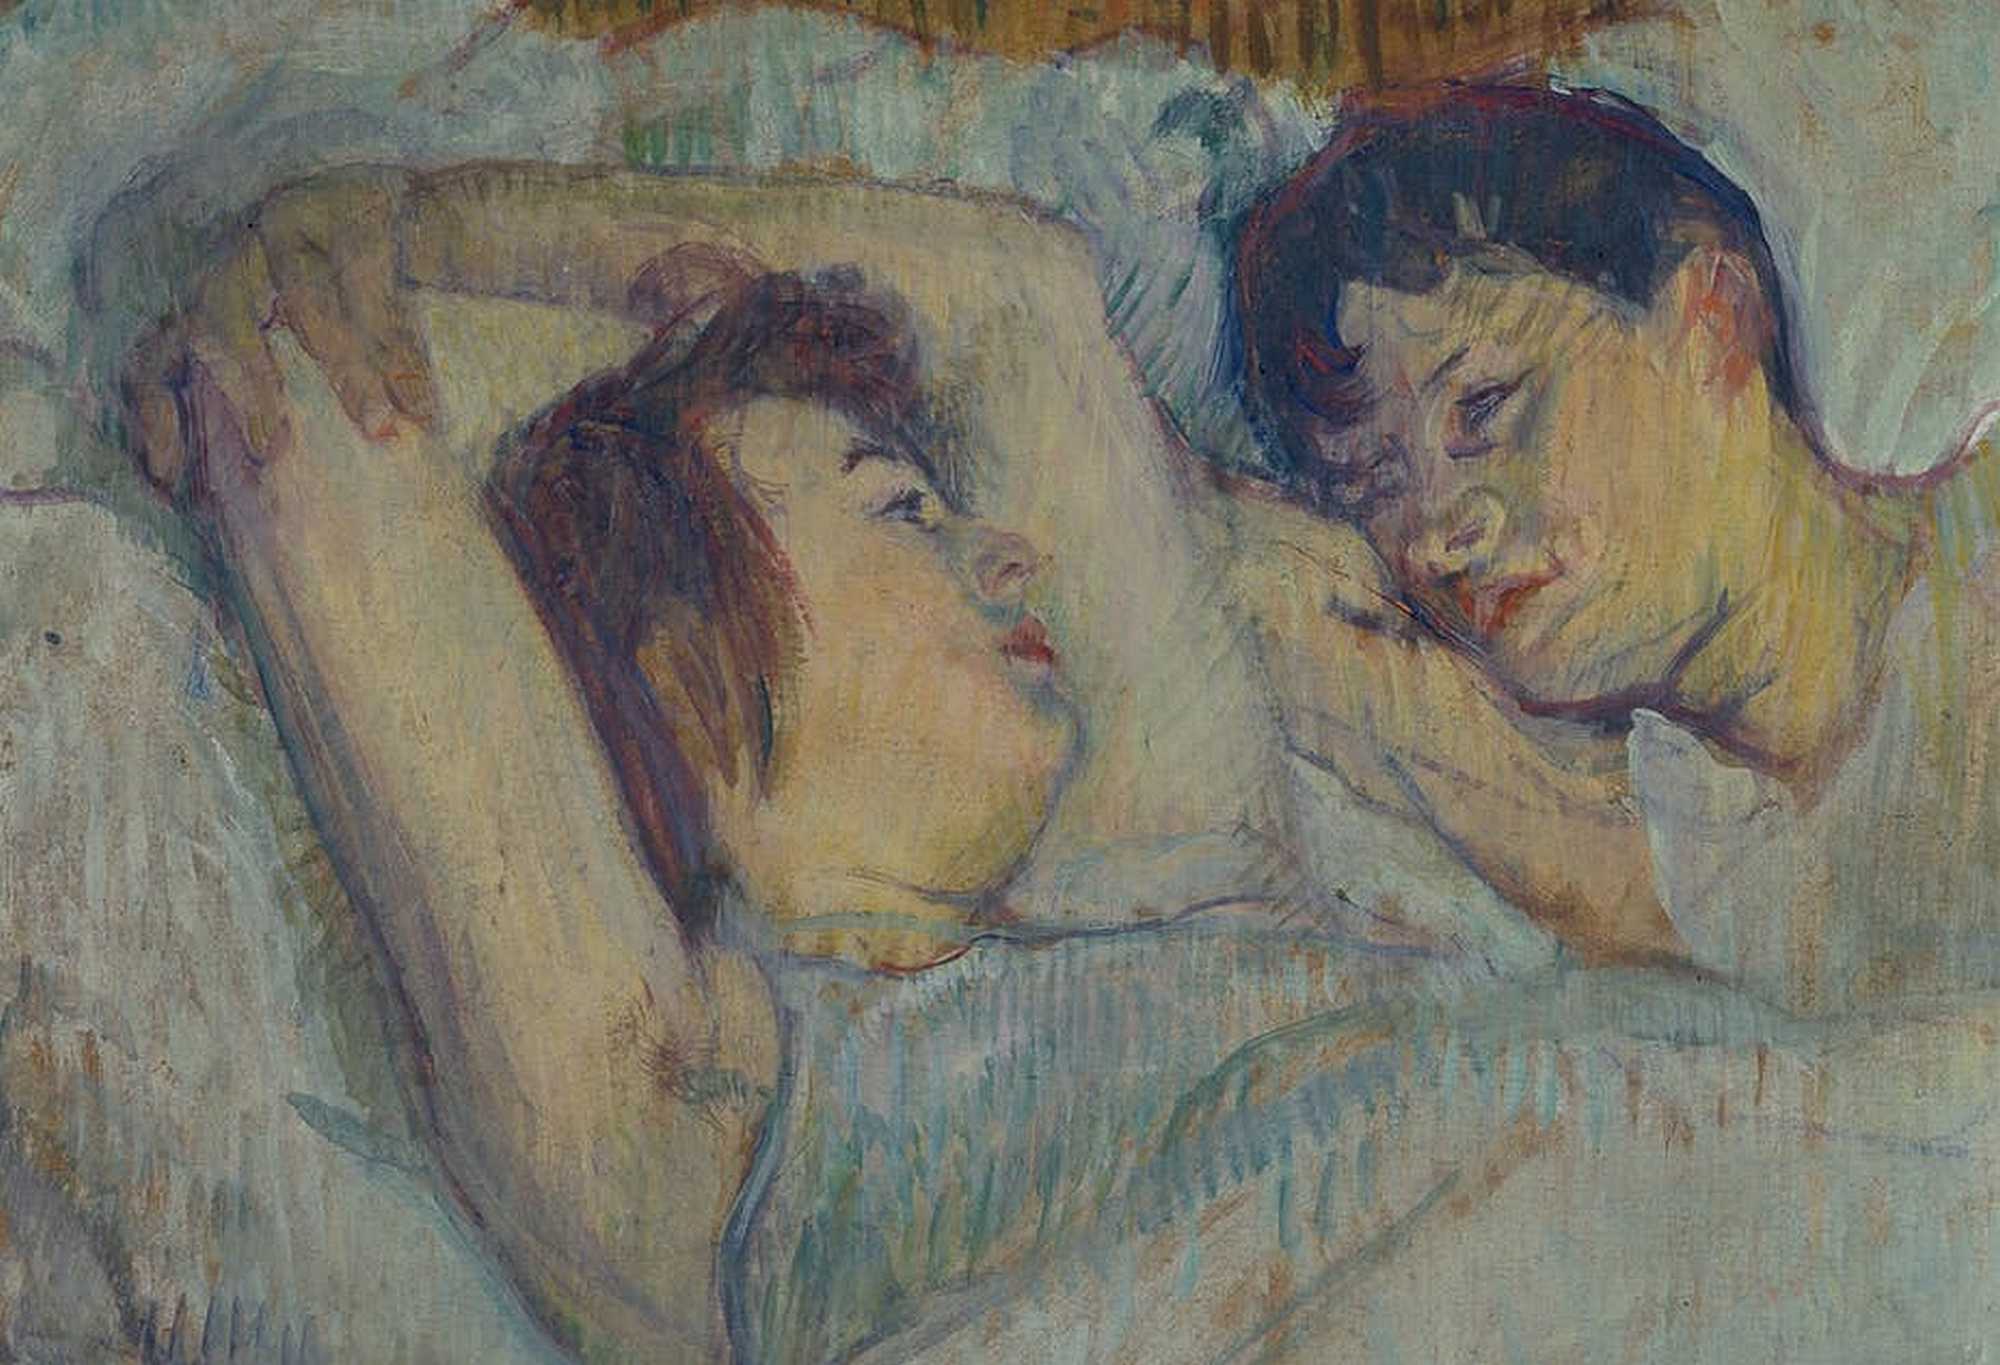 A painting of a woman lying in bed next to a man. Heritage Images/Hilton Fine Art Collection via Getty Images